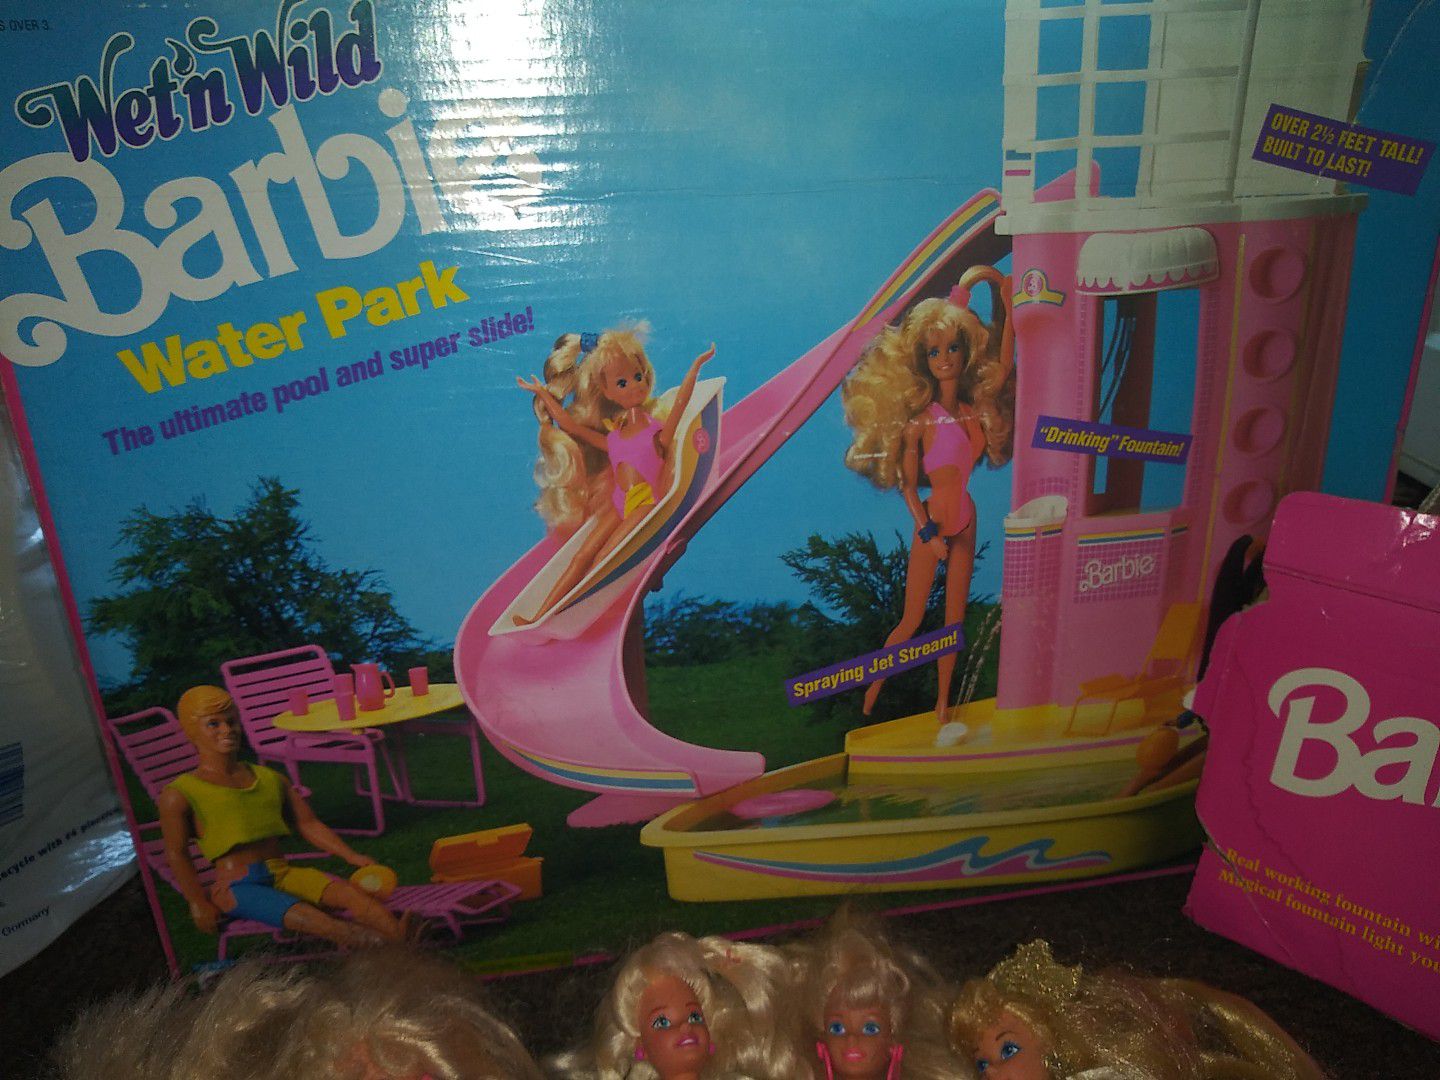 Vintage 80s wet and wild water park with barbie.